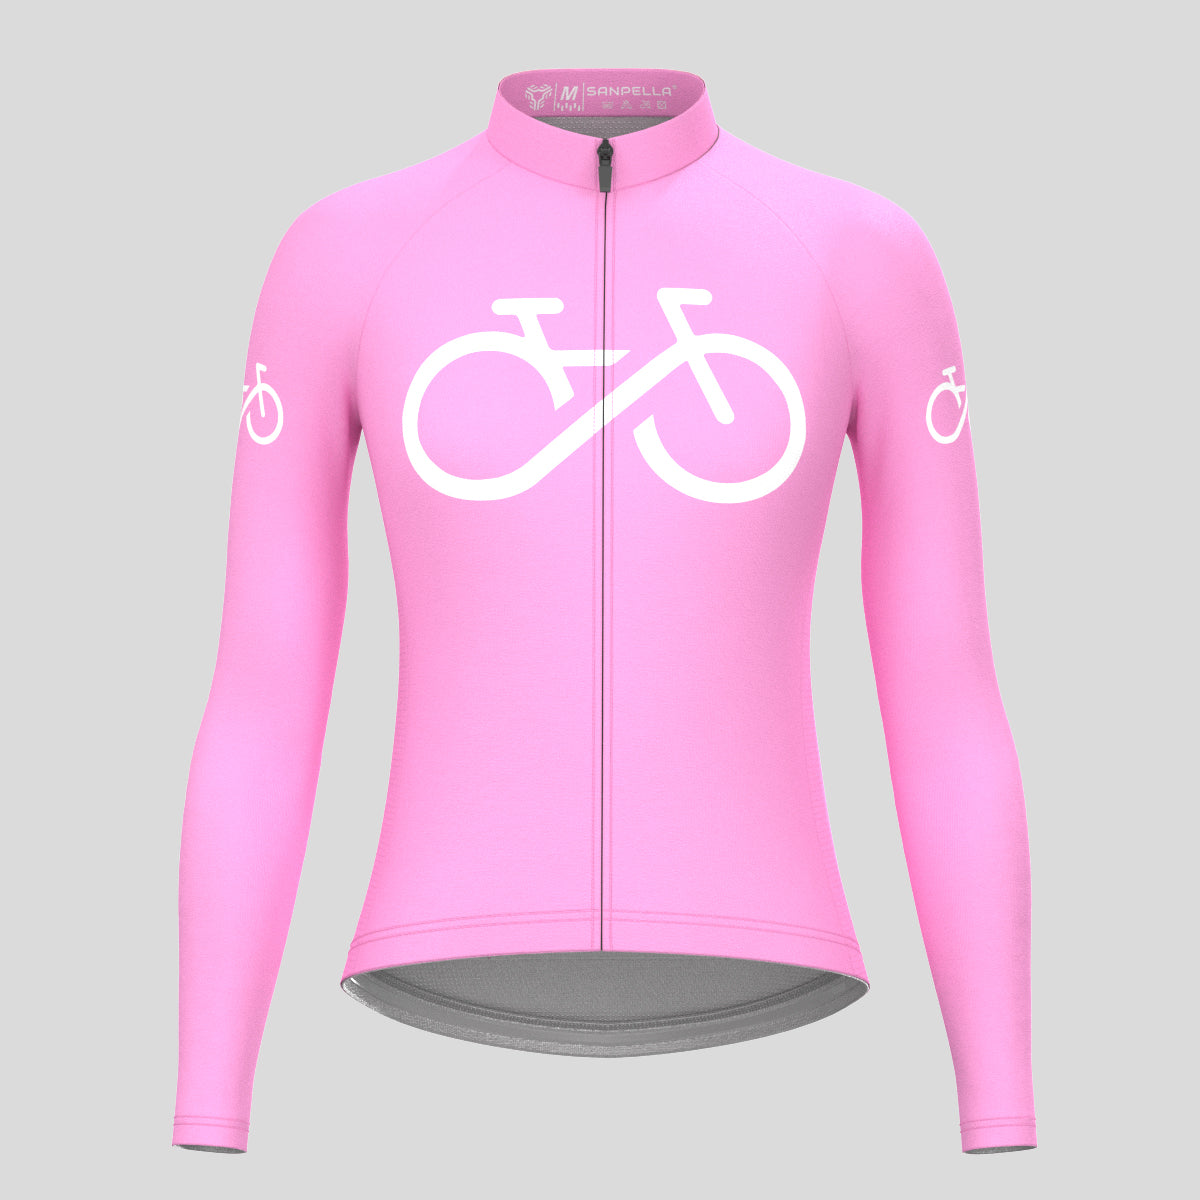 Bike Forever Women's LS Cycling Jersey - Neo Pink